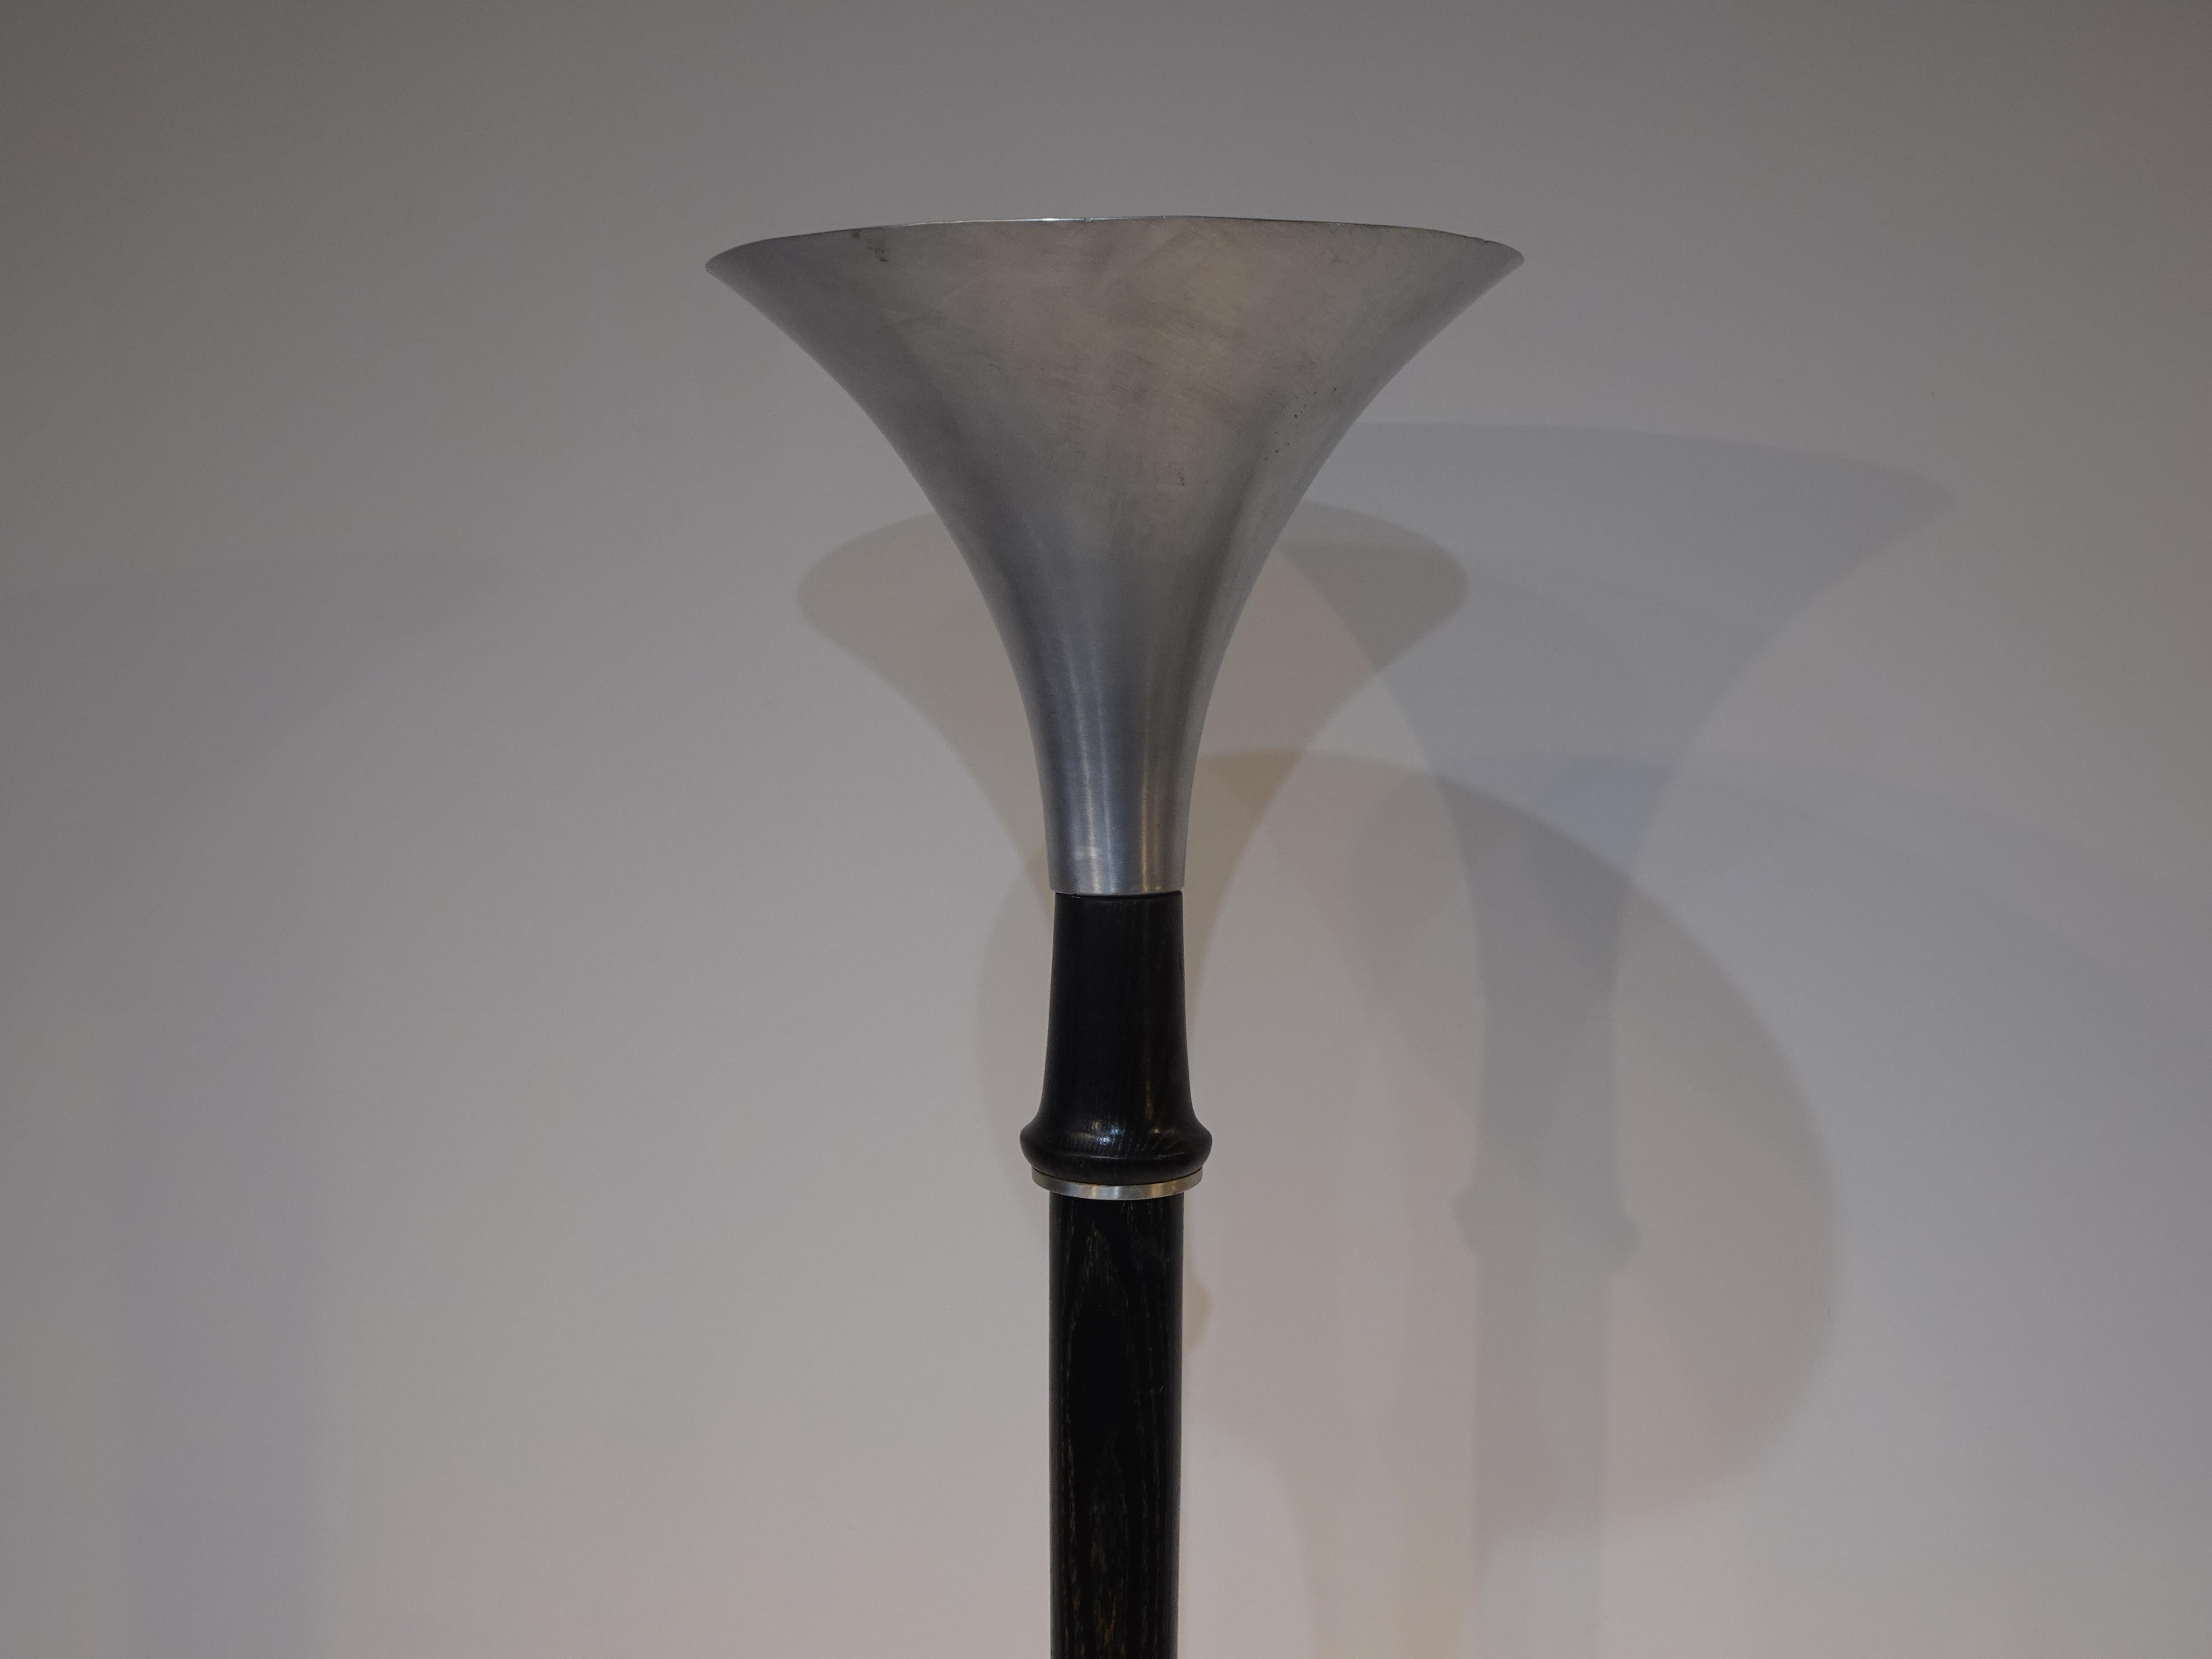 A very well crafted torchiere floor lamp with spun aluminum shade and base with aluminum detail to the dark pickled wood shaft. Attributed to Russel Wright and manufactured in the 1940's a piece that works with Art Deco, Machine Age or Mid Century